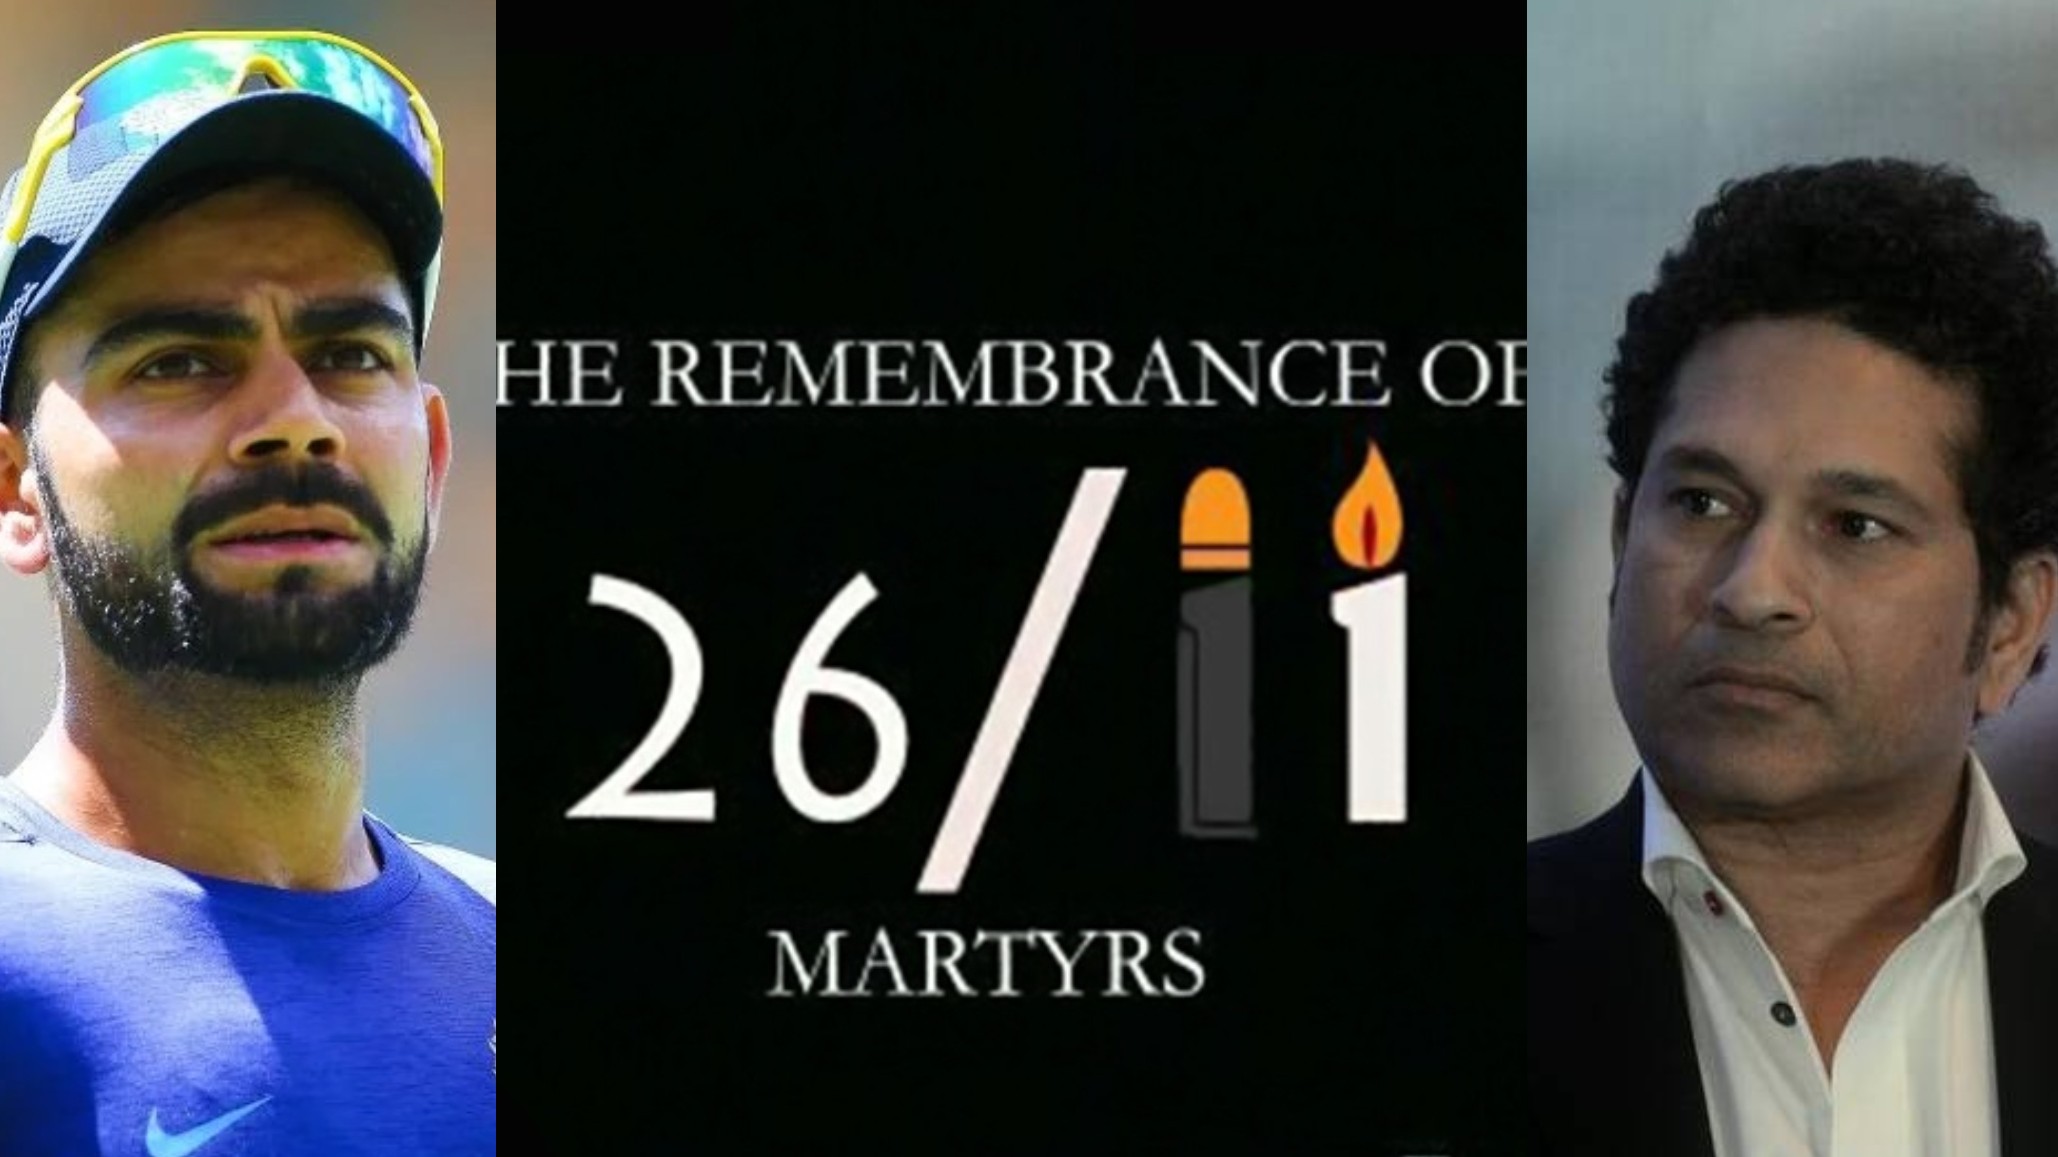 Indian cricket fraternity pays tributes to martyrs on 12th anniversary of 26/11 Mumbai terrorist attacks